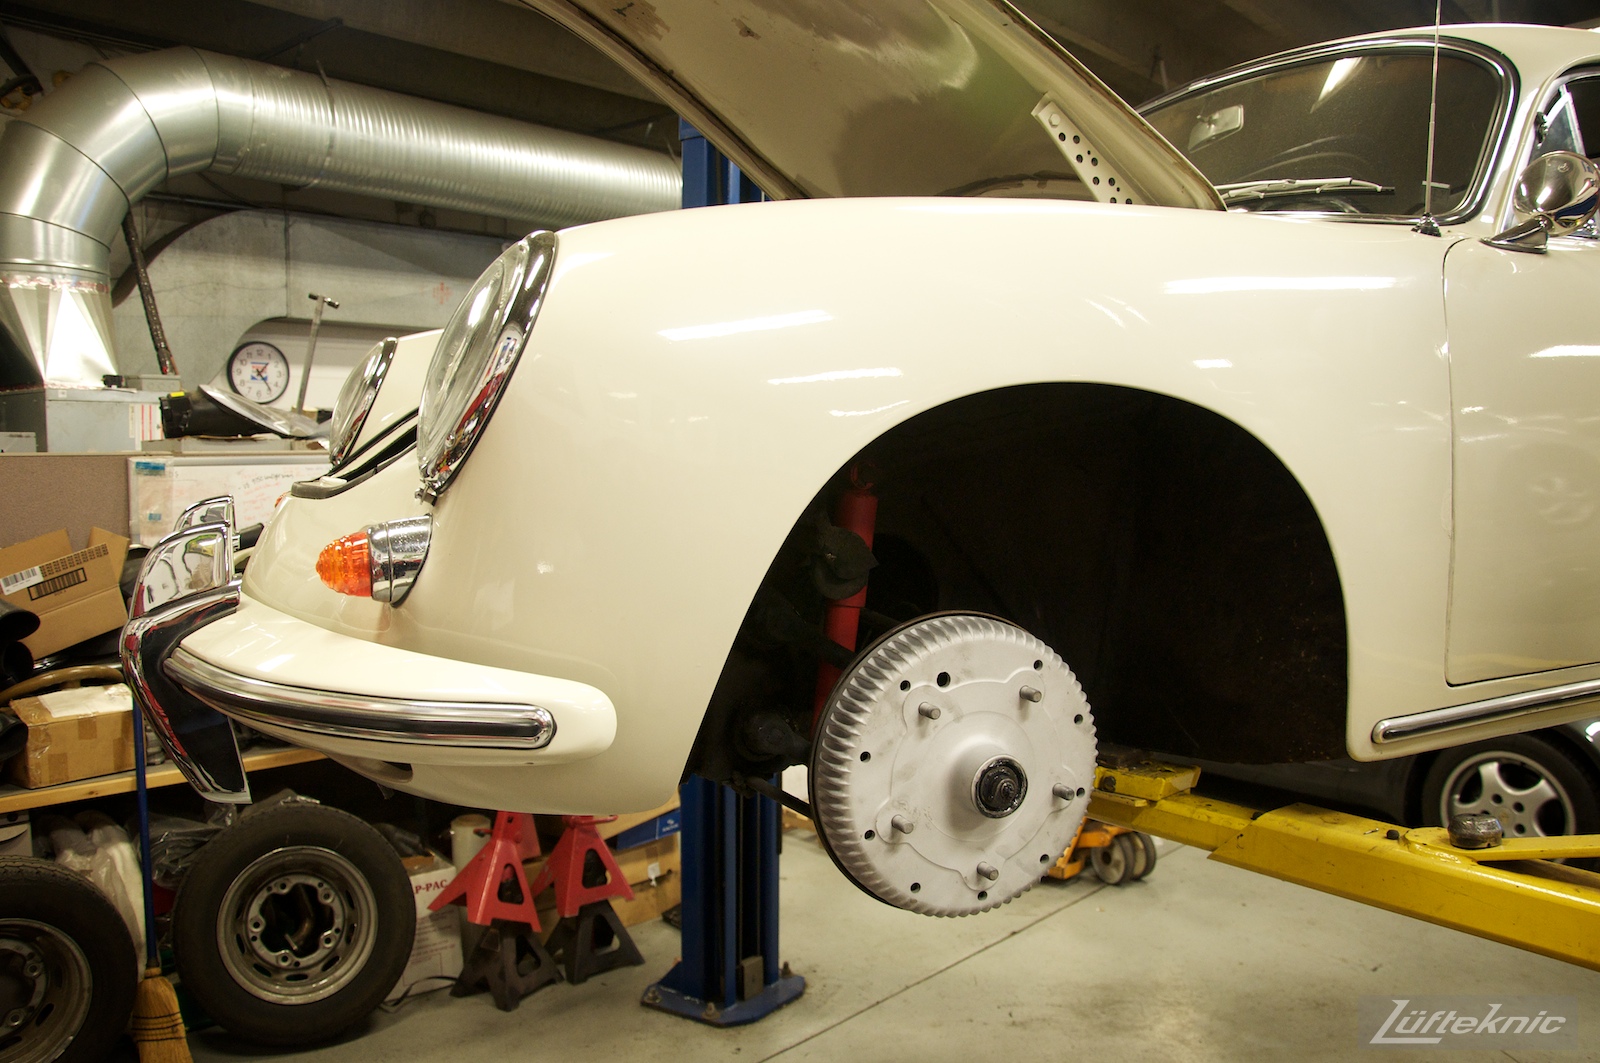 A white Porsche 356 on a lift at Lufteknic with the wheel removed showing a fresh brake drum